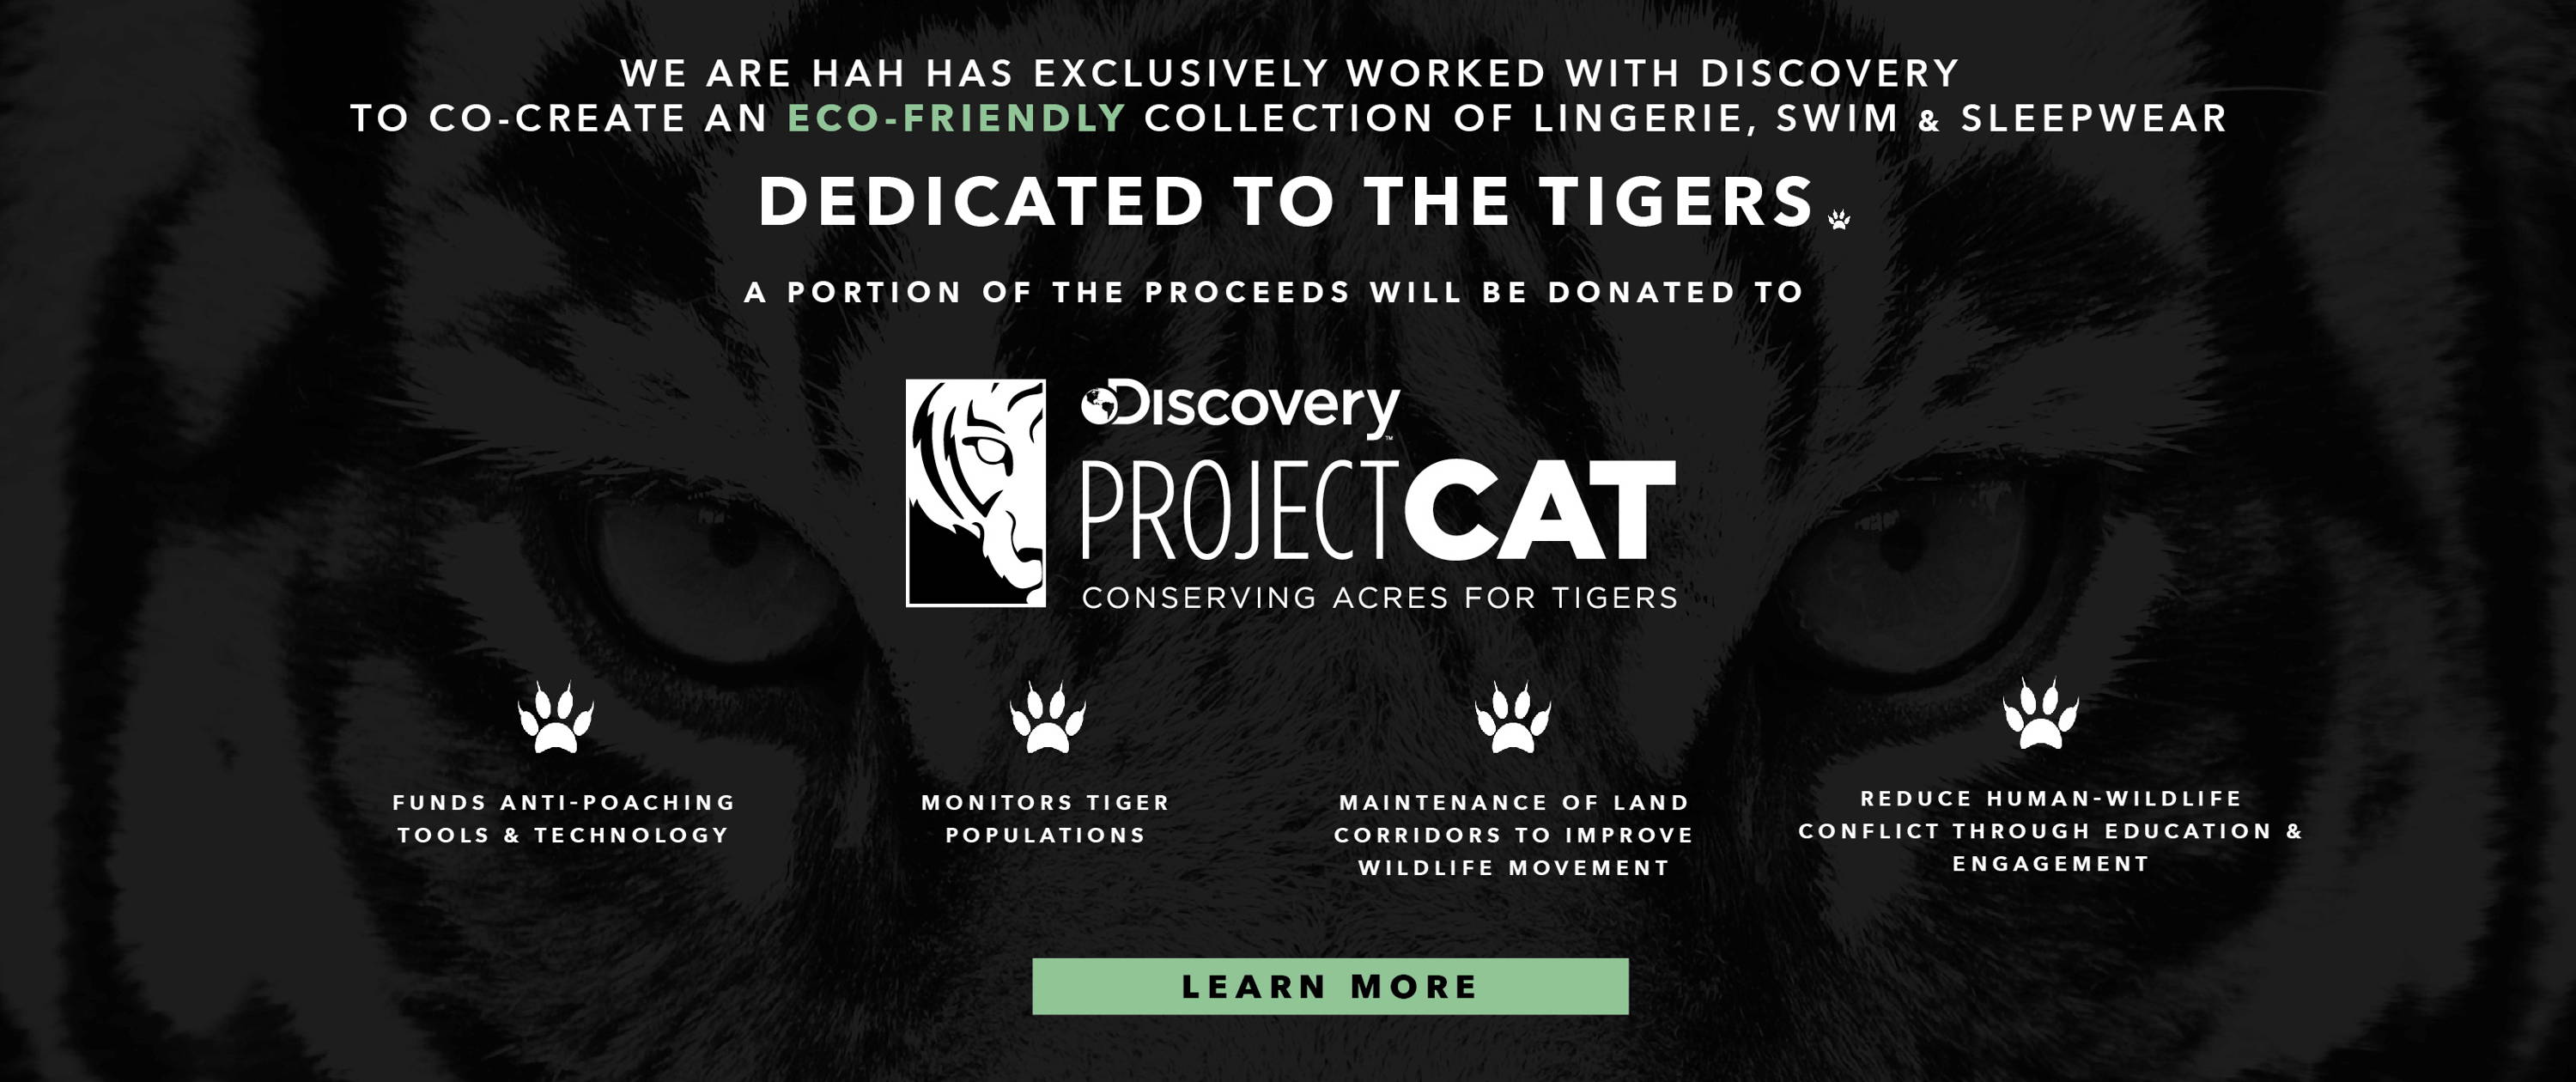 WE ARE HAH HAS EXCLUSIVELY WORKED WITH DISCOVERY TO CO-CREATE AN ECO-FRIENDLY COLLECTION OF LINGERIE, SWIM & SLEEPWEAR DEDICATED TO THE TIGERS.a portion of the proceeds will be donated to PROJECT CAT consrving acres for tigers. project CAT funds anti-poaching tools and technology. project cat monitors tiger populations. project cat maintenance of land corridors to improve wildlife movement. project catreduce human-wildlife conflict through education & engagement. tiger print bikini tiger print underwear